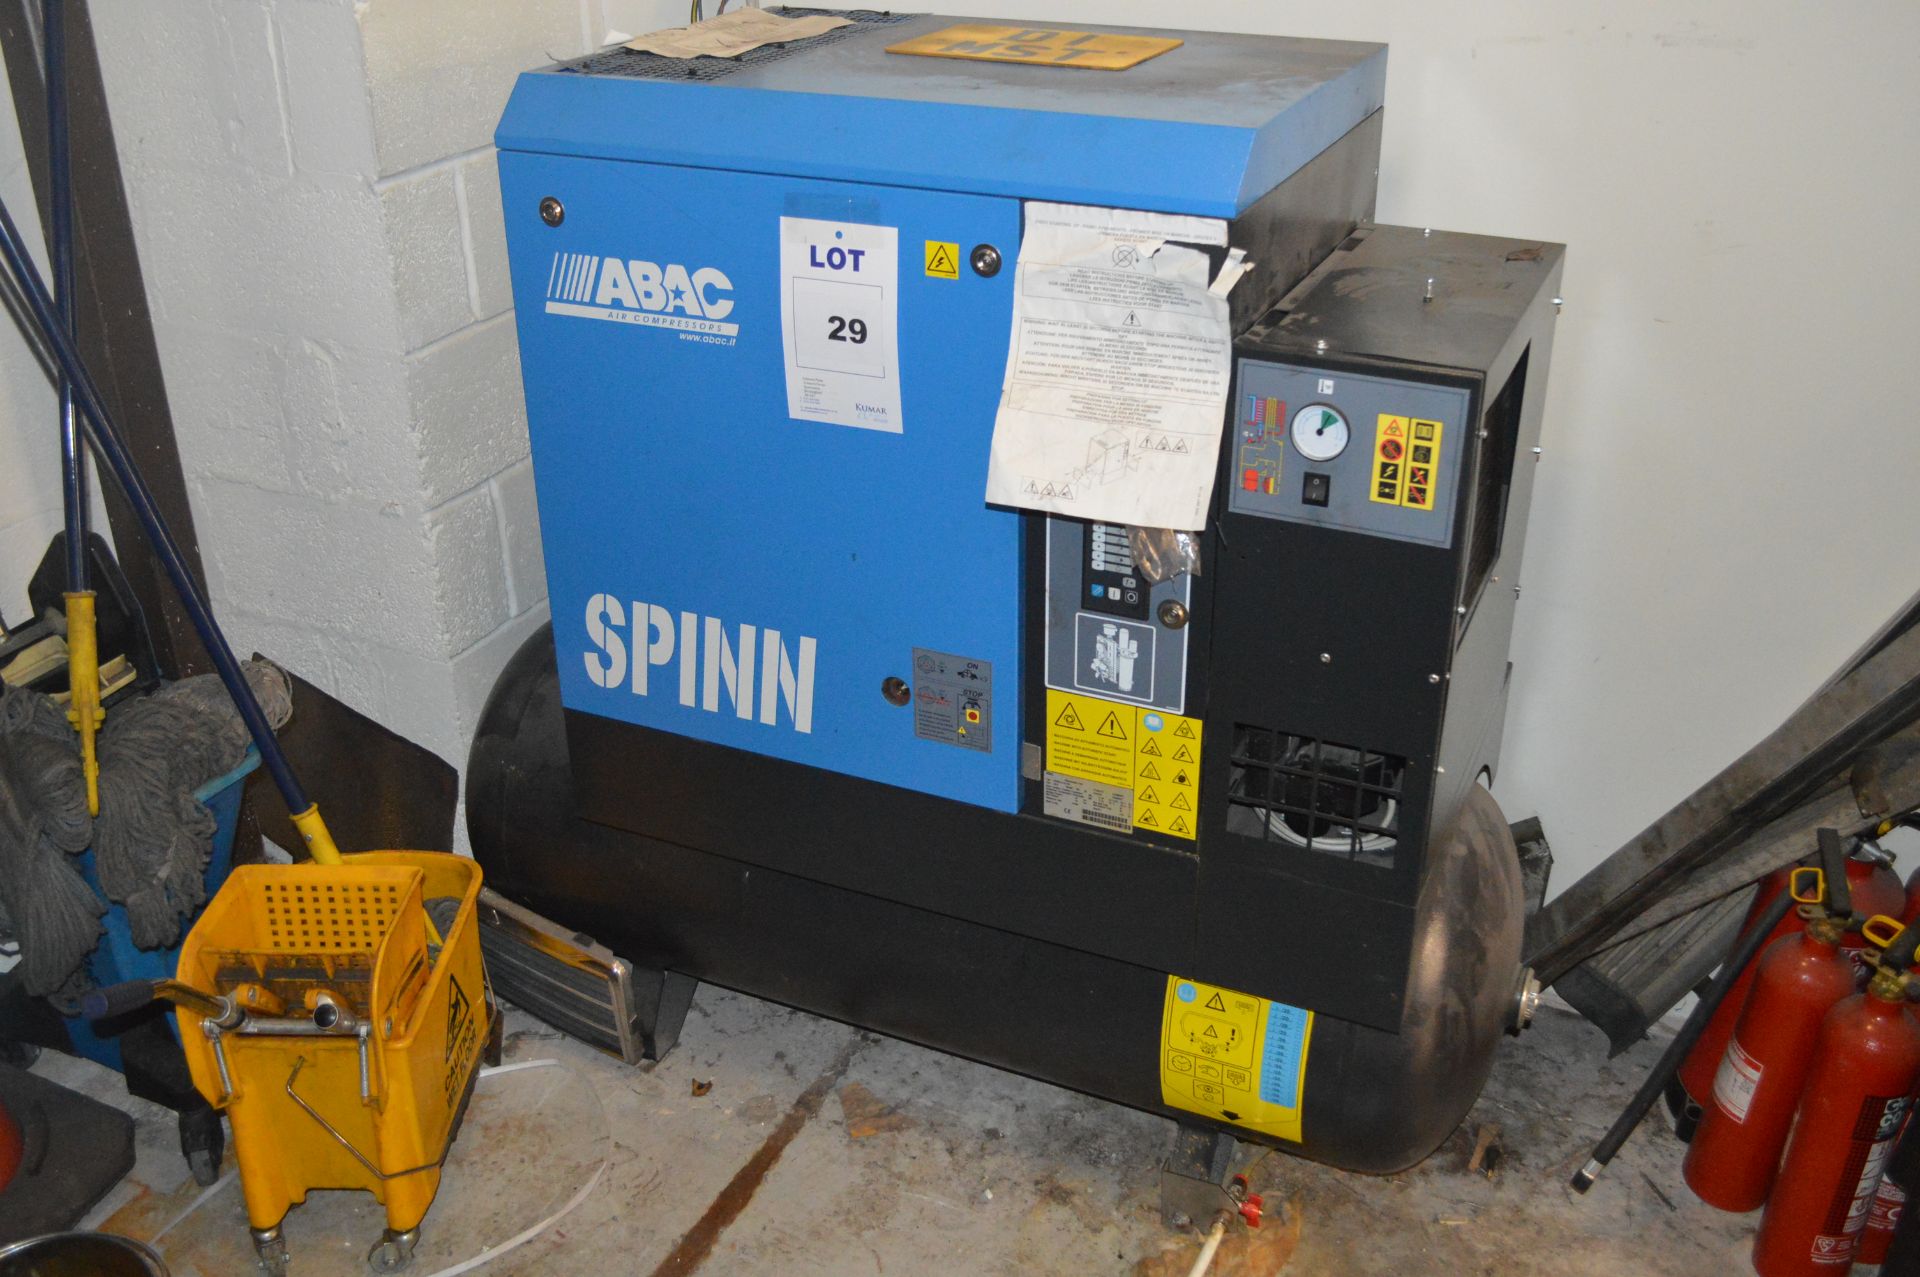 ABAC Receiver Mounted Air Compressor Type Spinn.E1110 270 Product NR 4152008073 Serial No. CAI682250 - Image 2 of 12